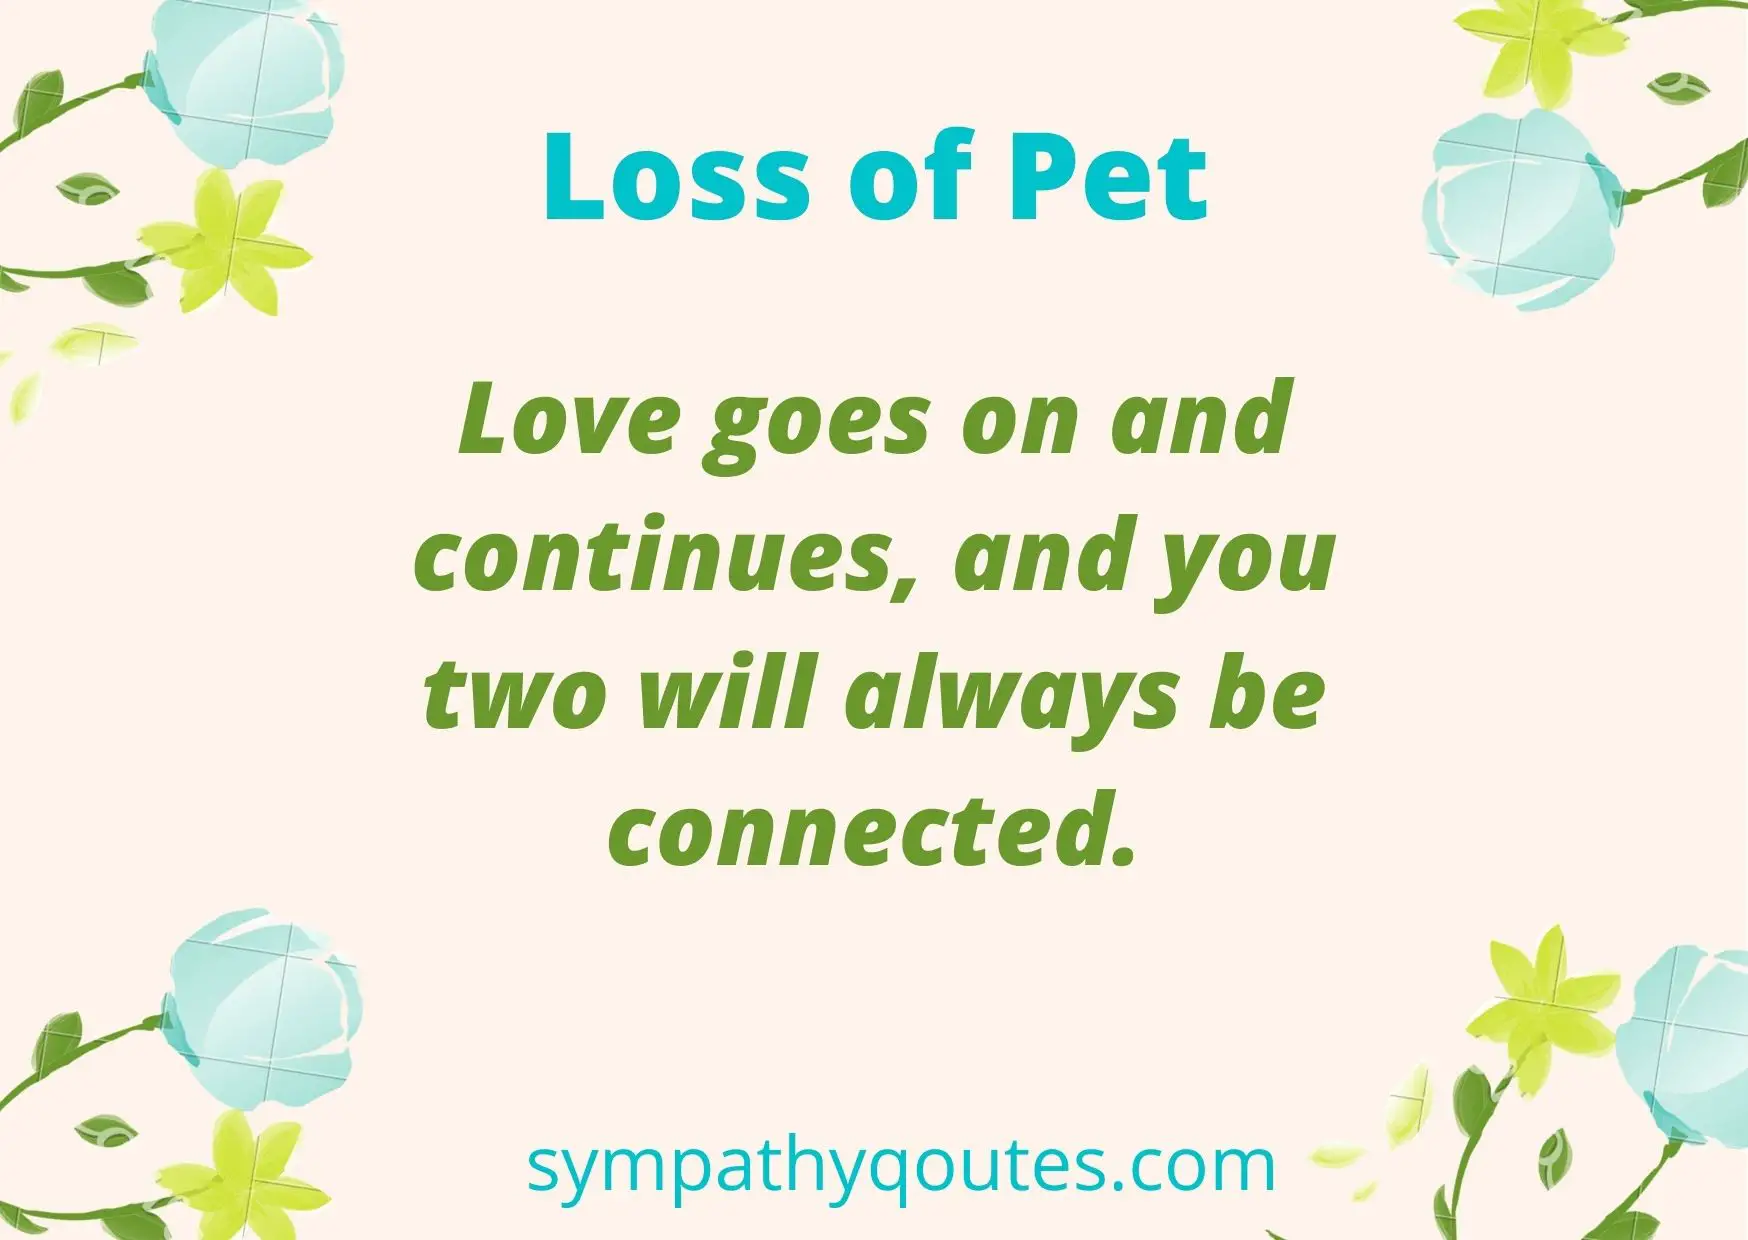  Sympathy Messages for Loss of Pet